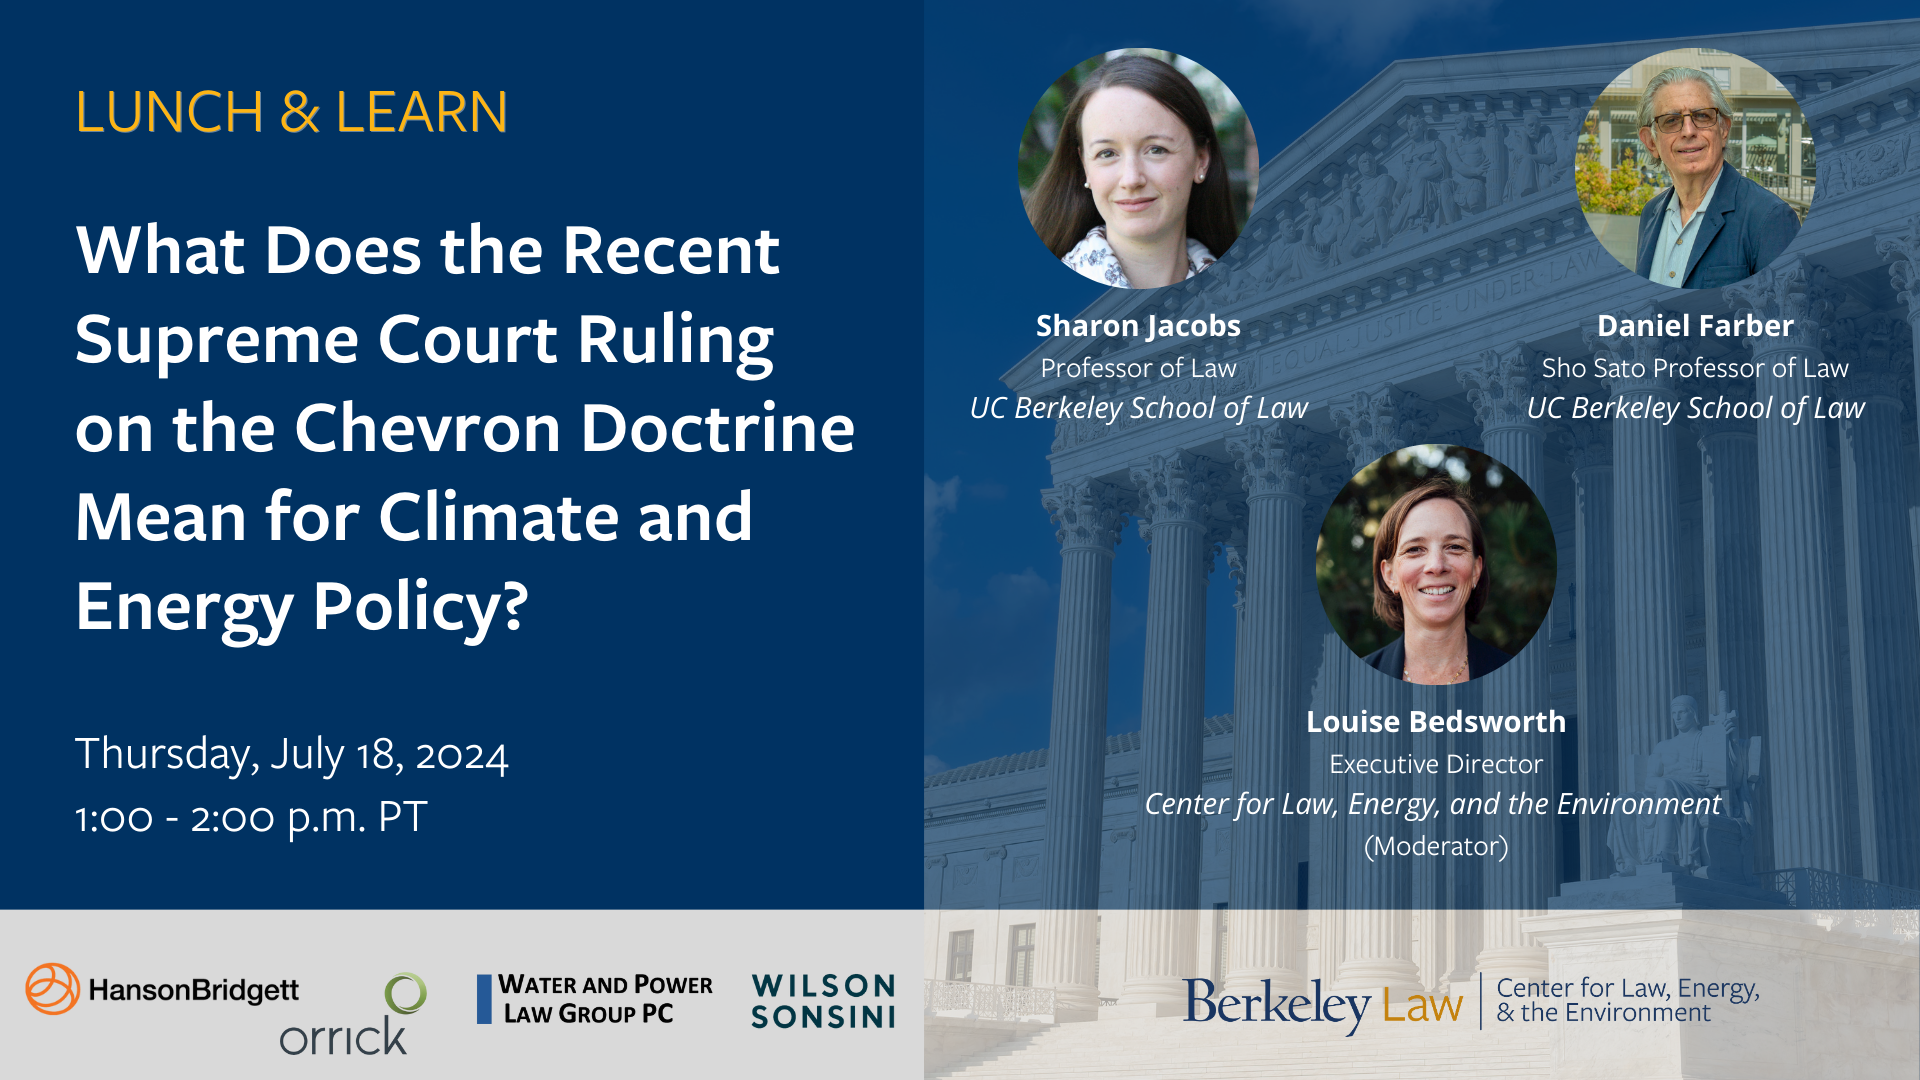 Lunch & Learn: What Does the Recent Supreme Court Ruling on the Chevron Doctrine Mean for Climate and Energy Policy? on a blue background with our three panelists listed on the right.